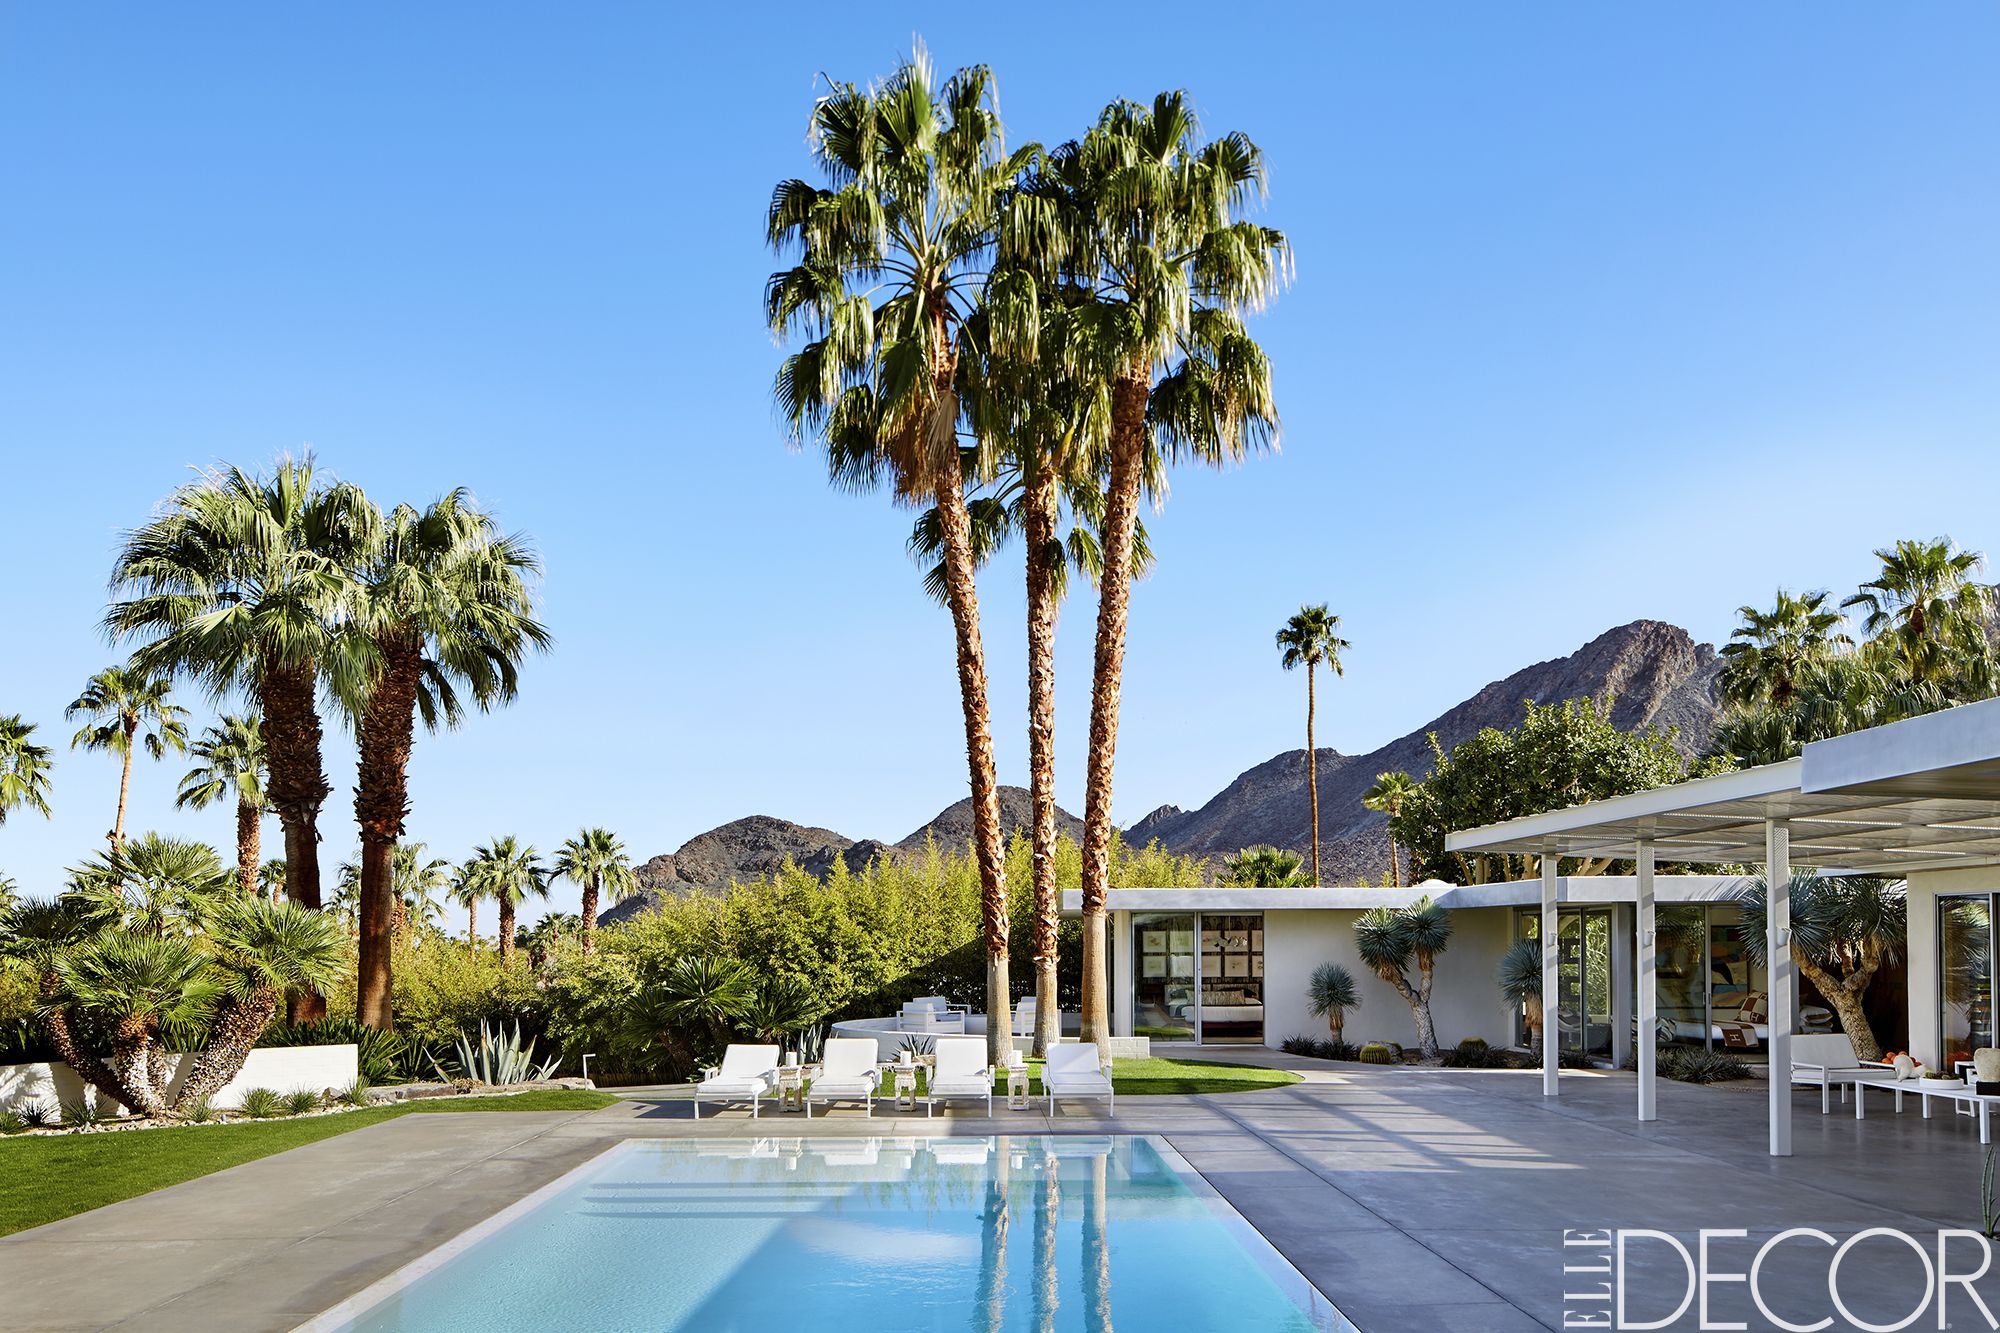 17 Best Boutique Hotels in Palm Springs: From Spanish Revival